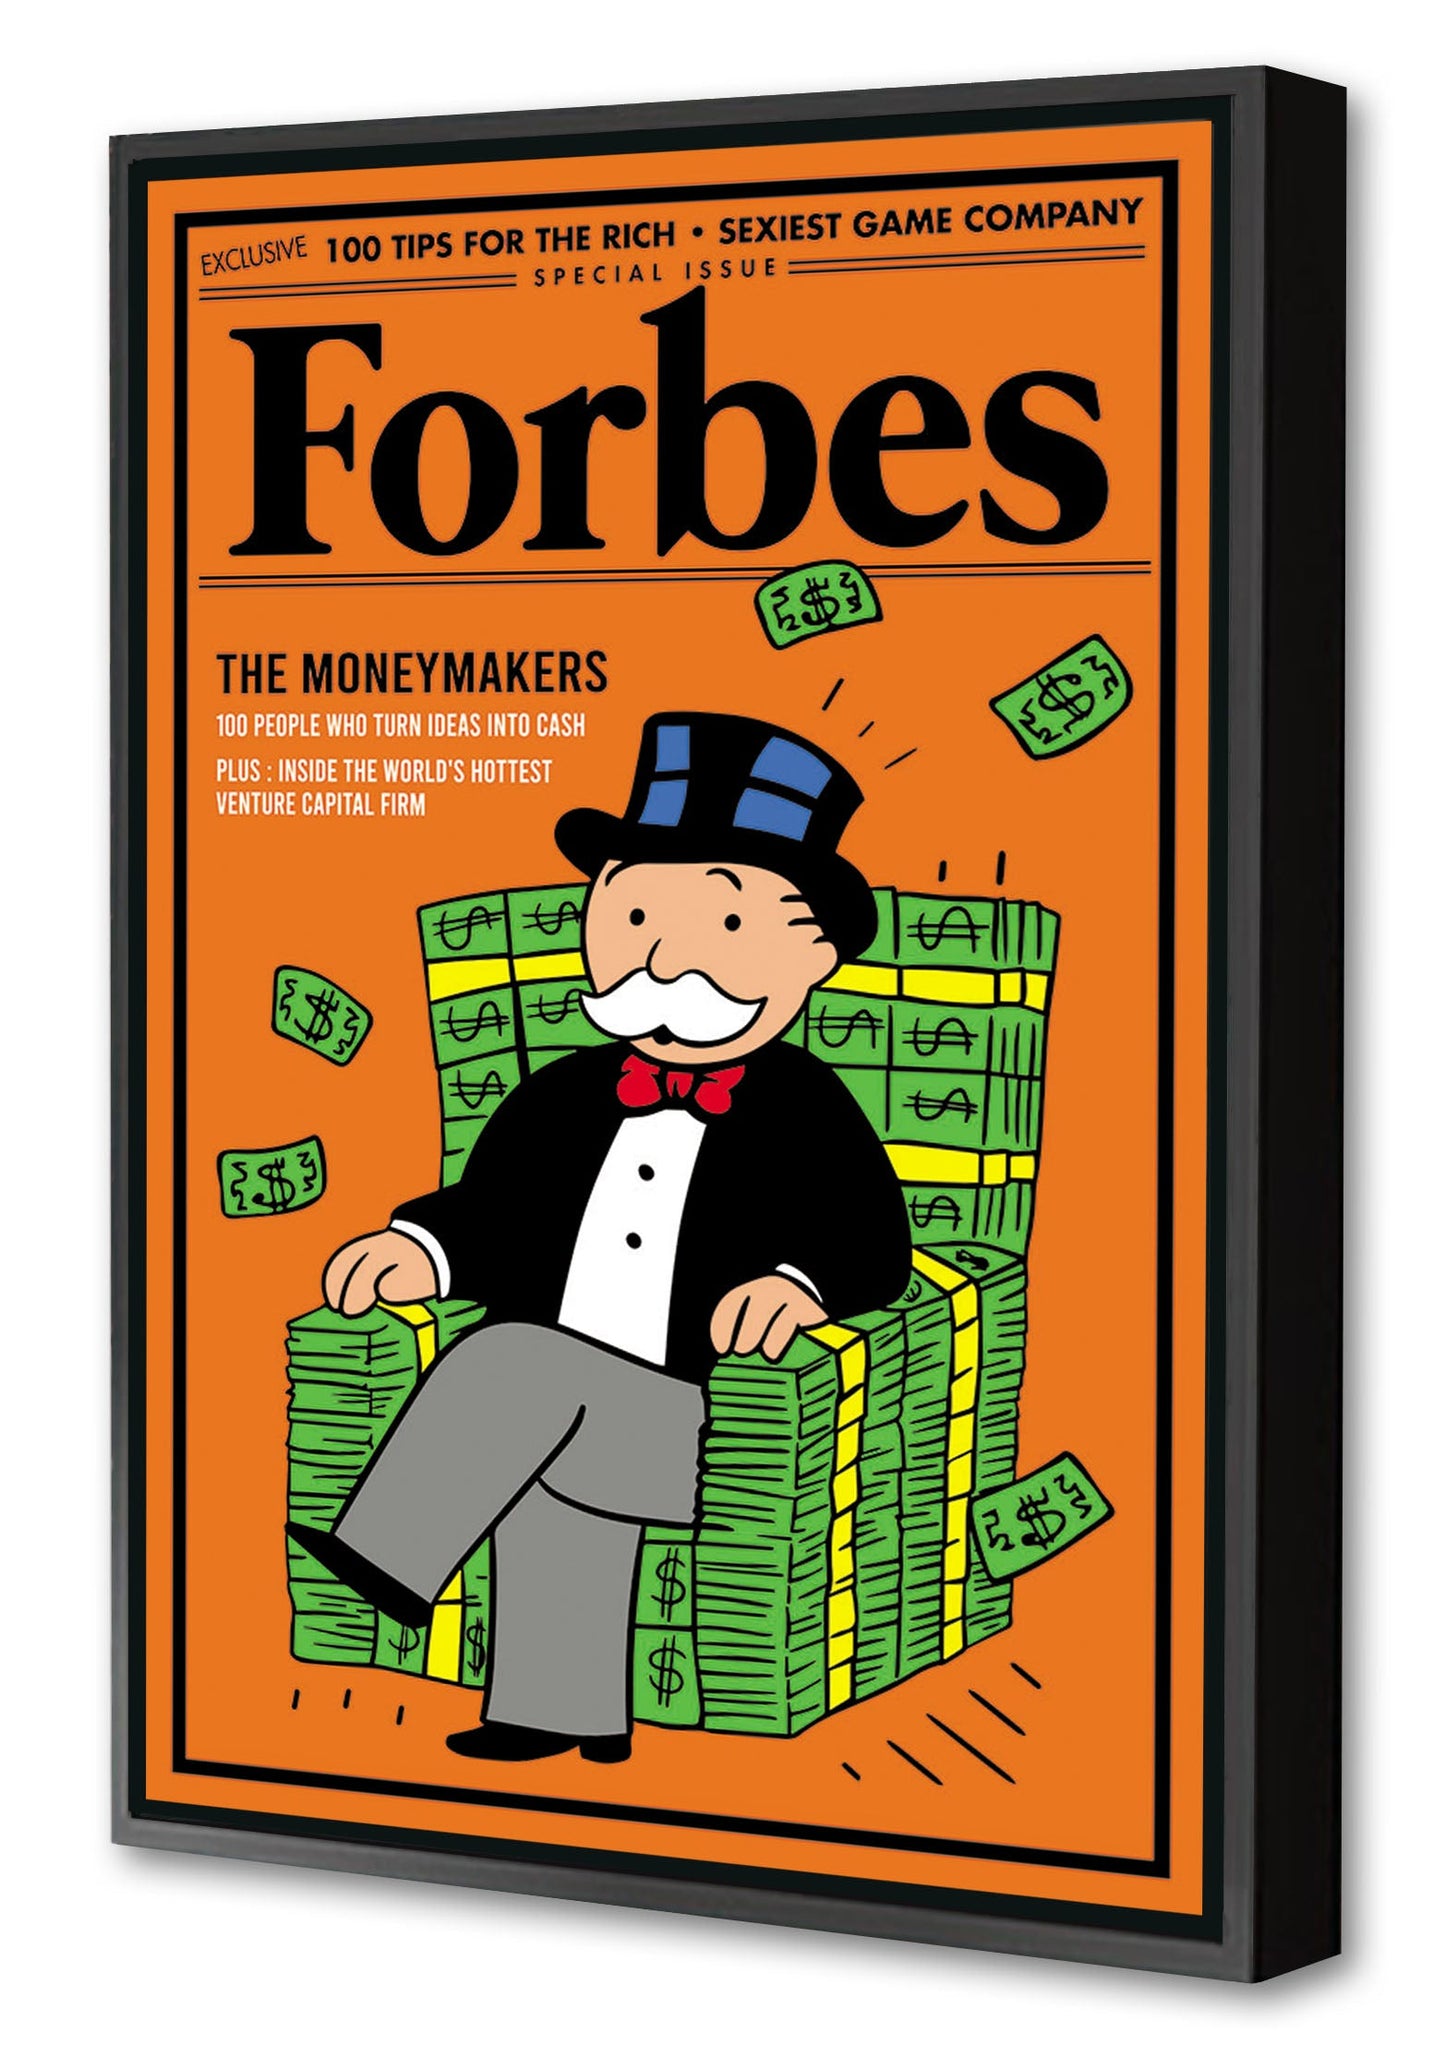 Forbes Moneymakers-forbes, print-Canvas Print with Box Frame-40 x 60 cm-BLUE SHAKER